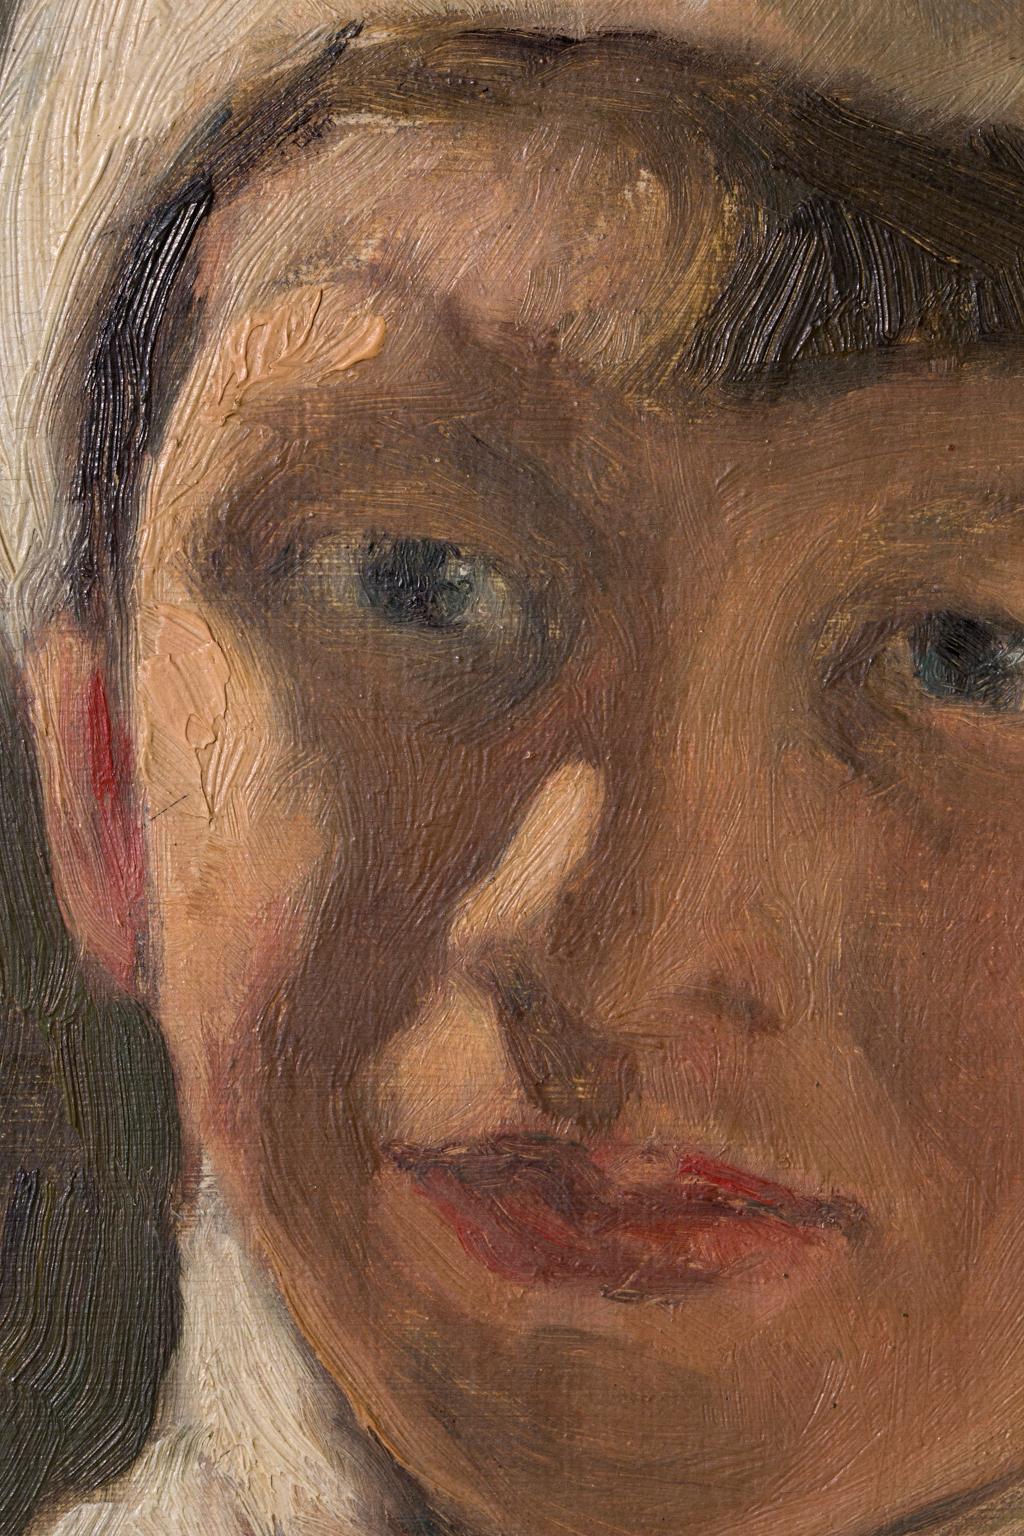 This portrait of a precocious young boy is significant for two reason: the subject is Eero Saarinen, the famed designer of tulip chairs and architect  best known for designing the Washington Dulles International Airport outside Washington, D.C., the